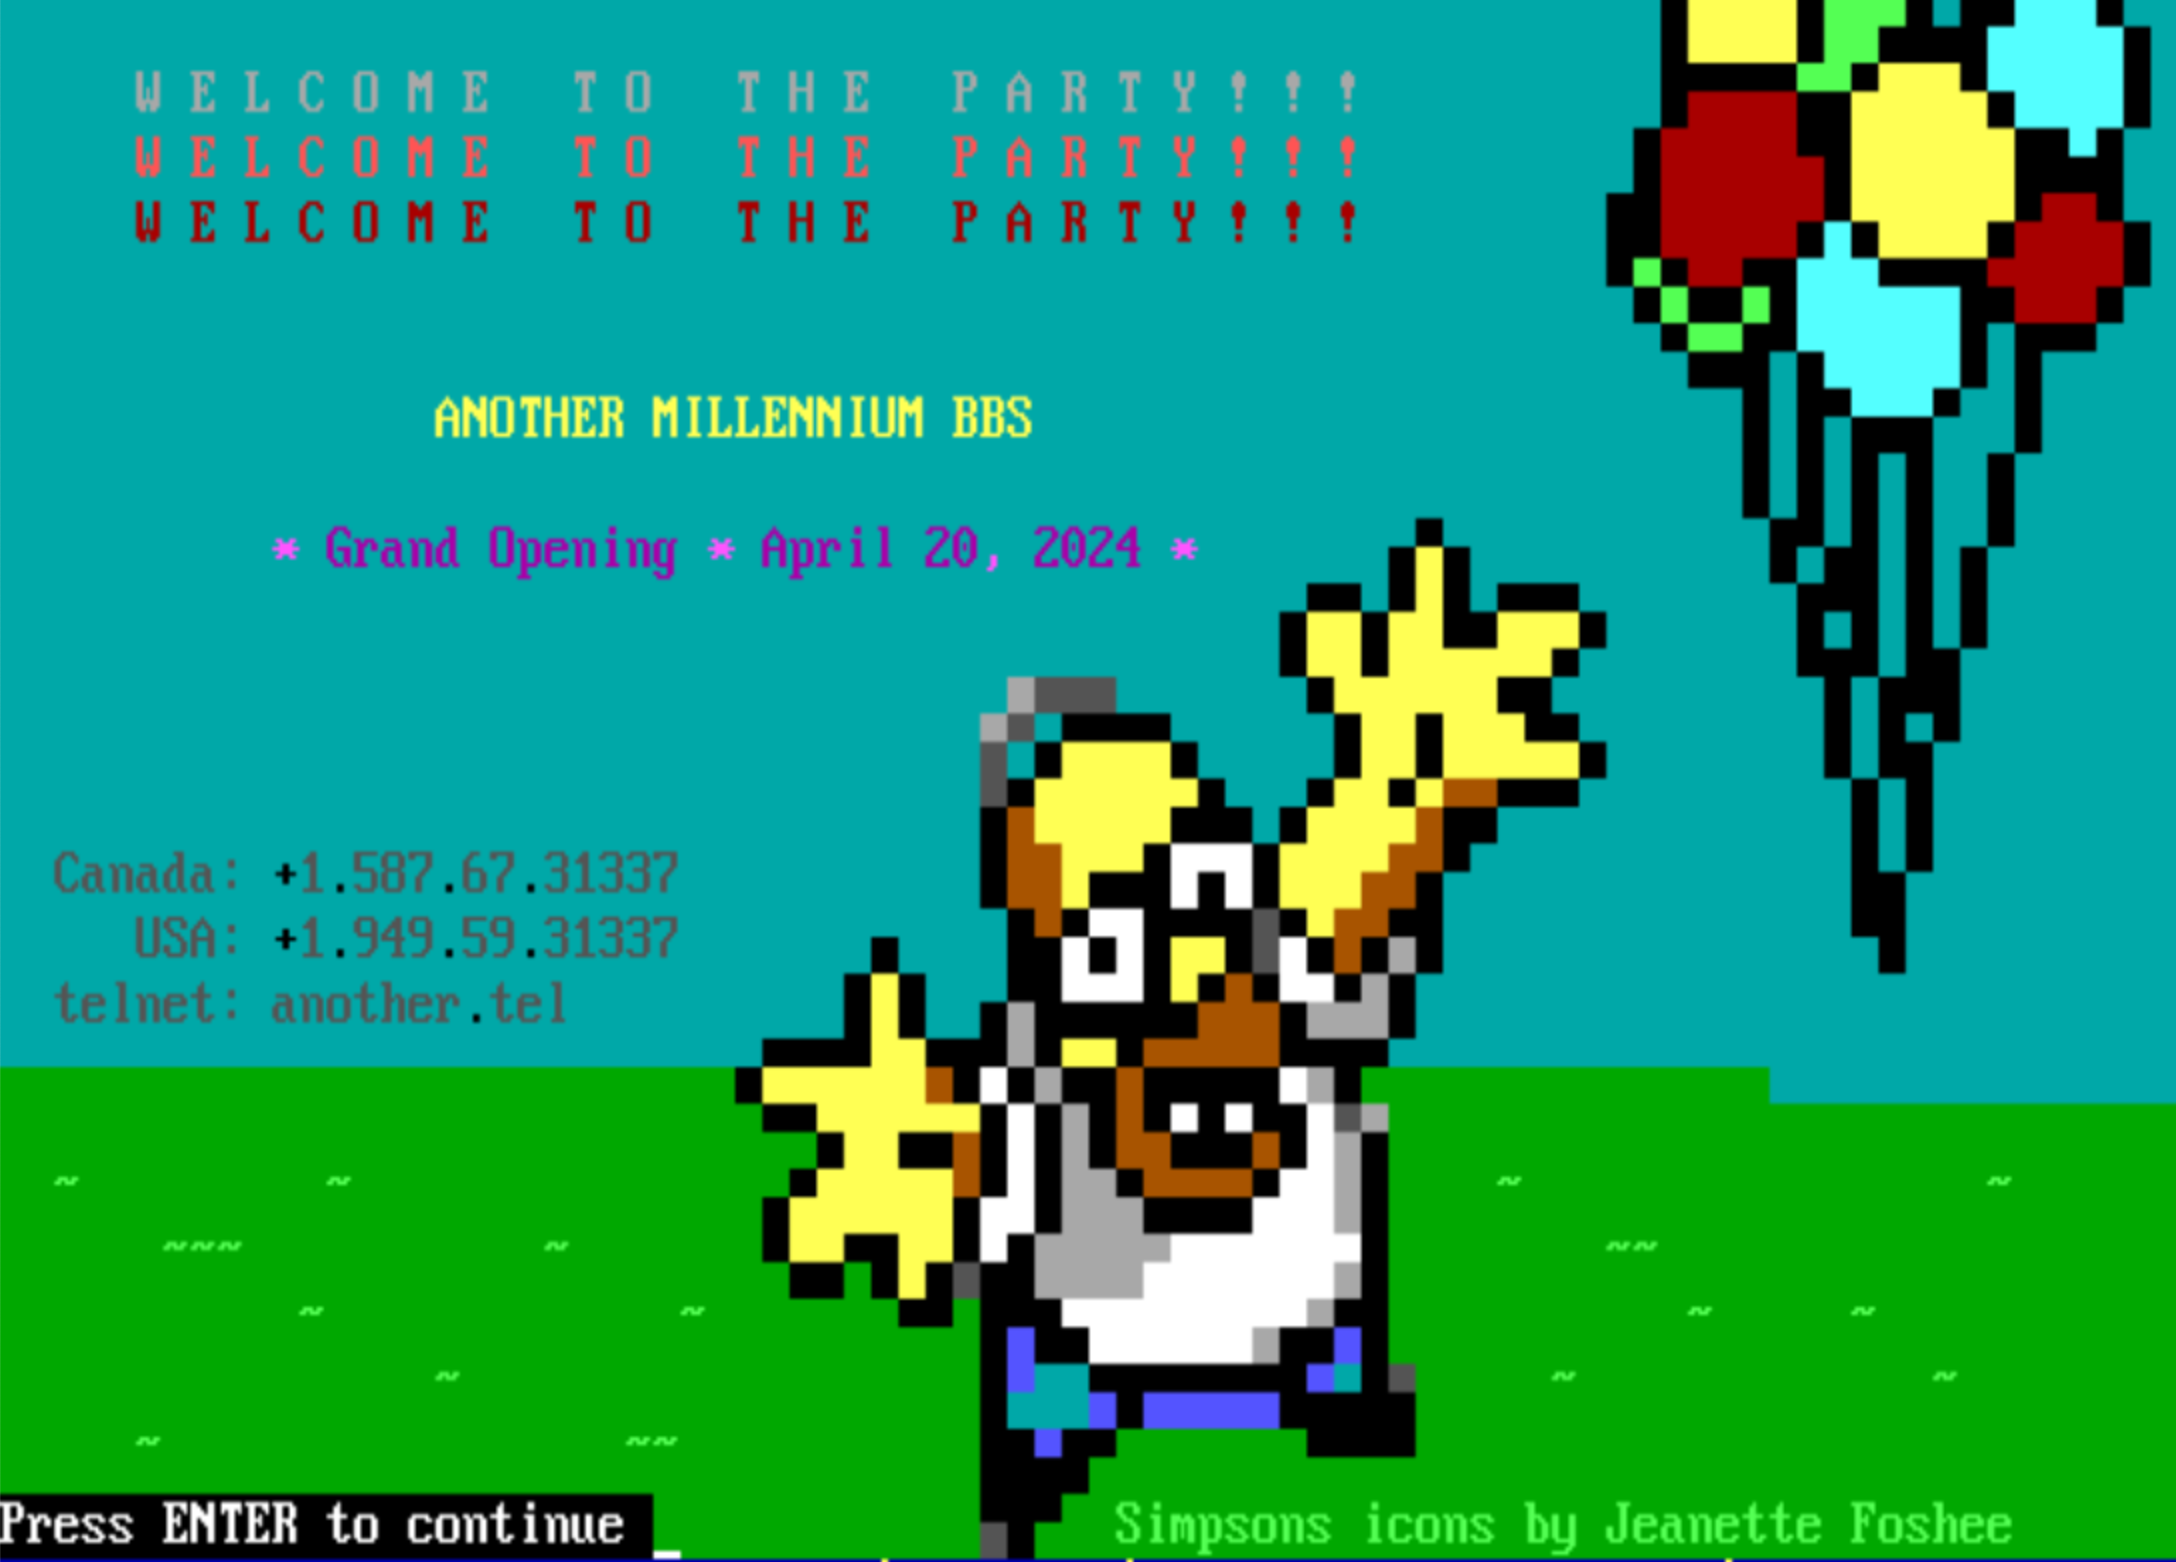 Welcome to the party! Another Millennium BBS Grand Opening April 20, 2024. ANSI image of Homer Simpson adapted from icon by Jeanette Foshee.